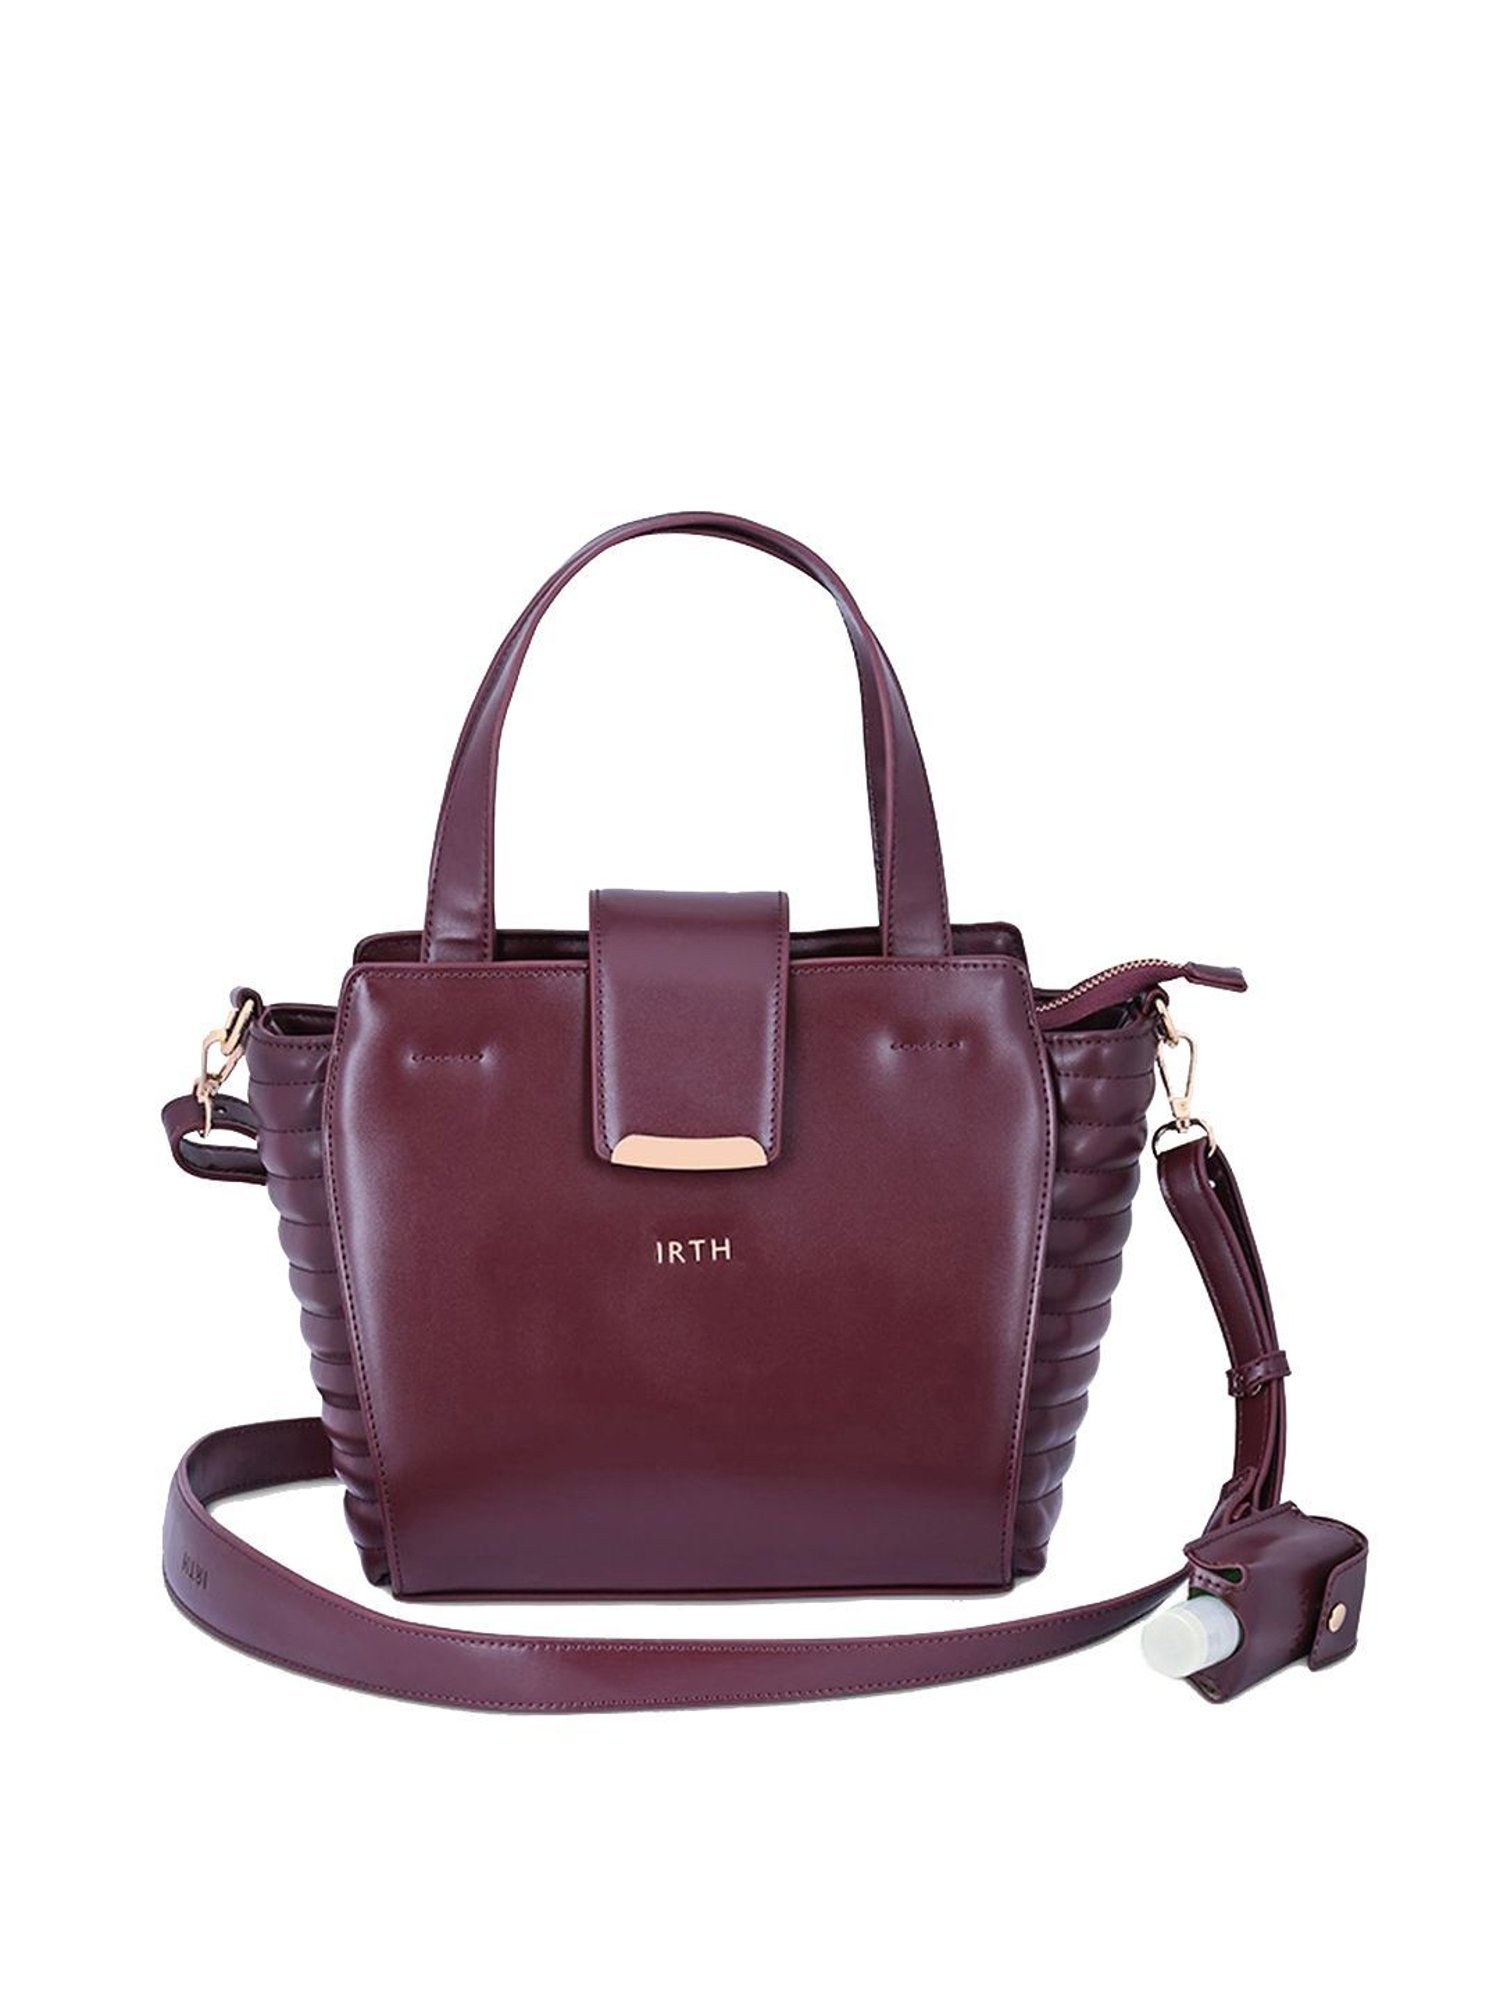 IRTH Women's Cherry Laptop Bag : Amazon.in: Bags, Wallets and Luggage